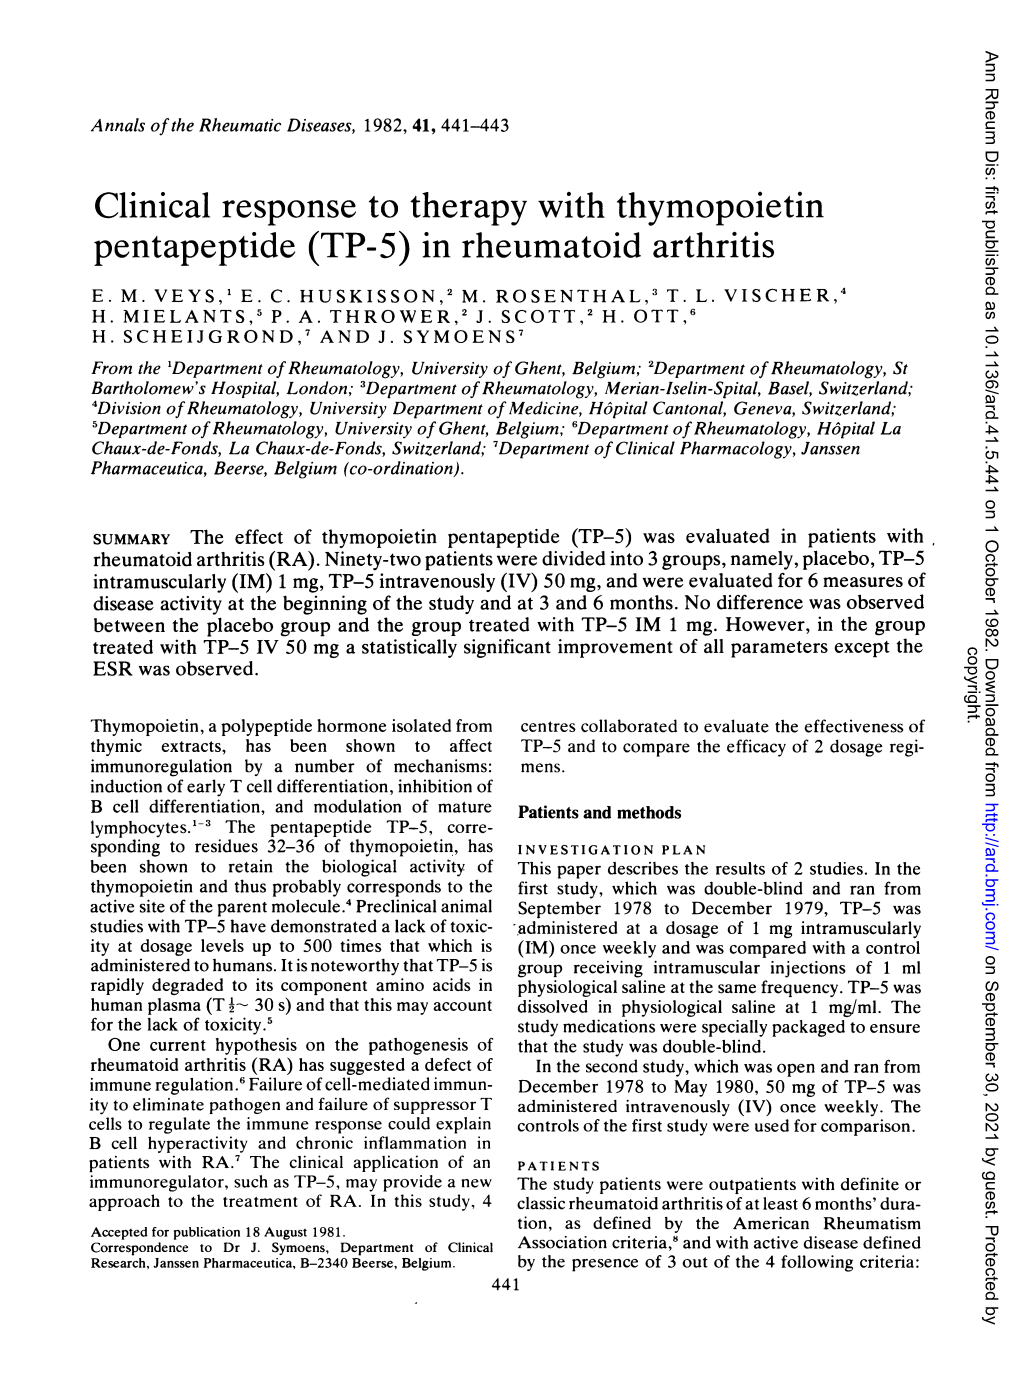 Clinical Response to Therapy with Thymopoietin Pentapeptide (TP-5) in Rheumatoid Arthritis E